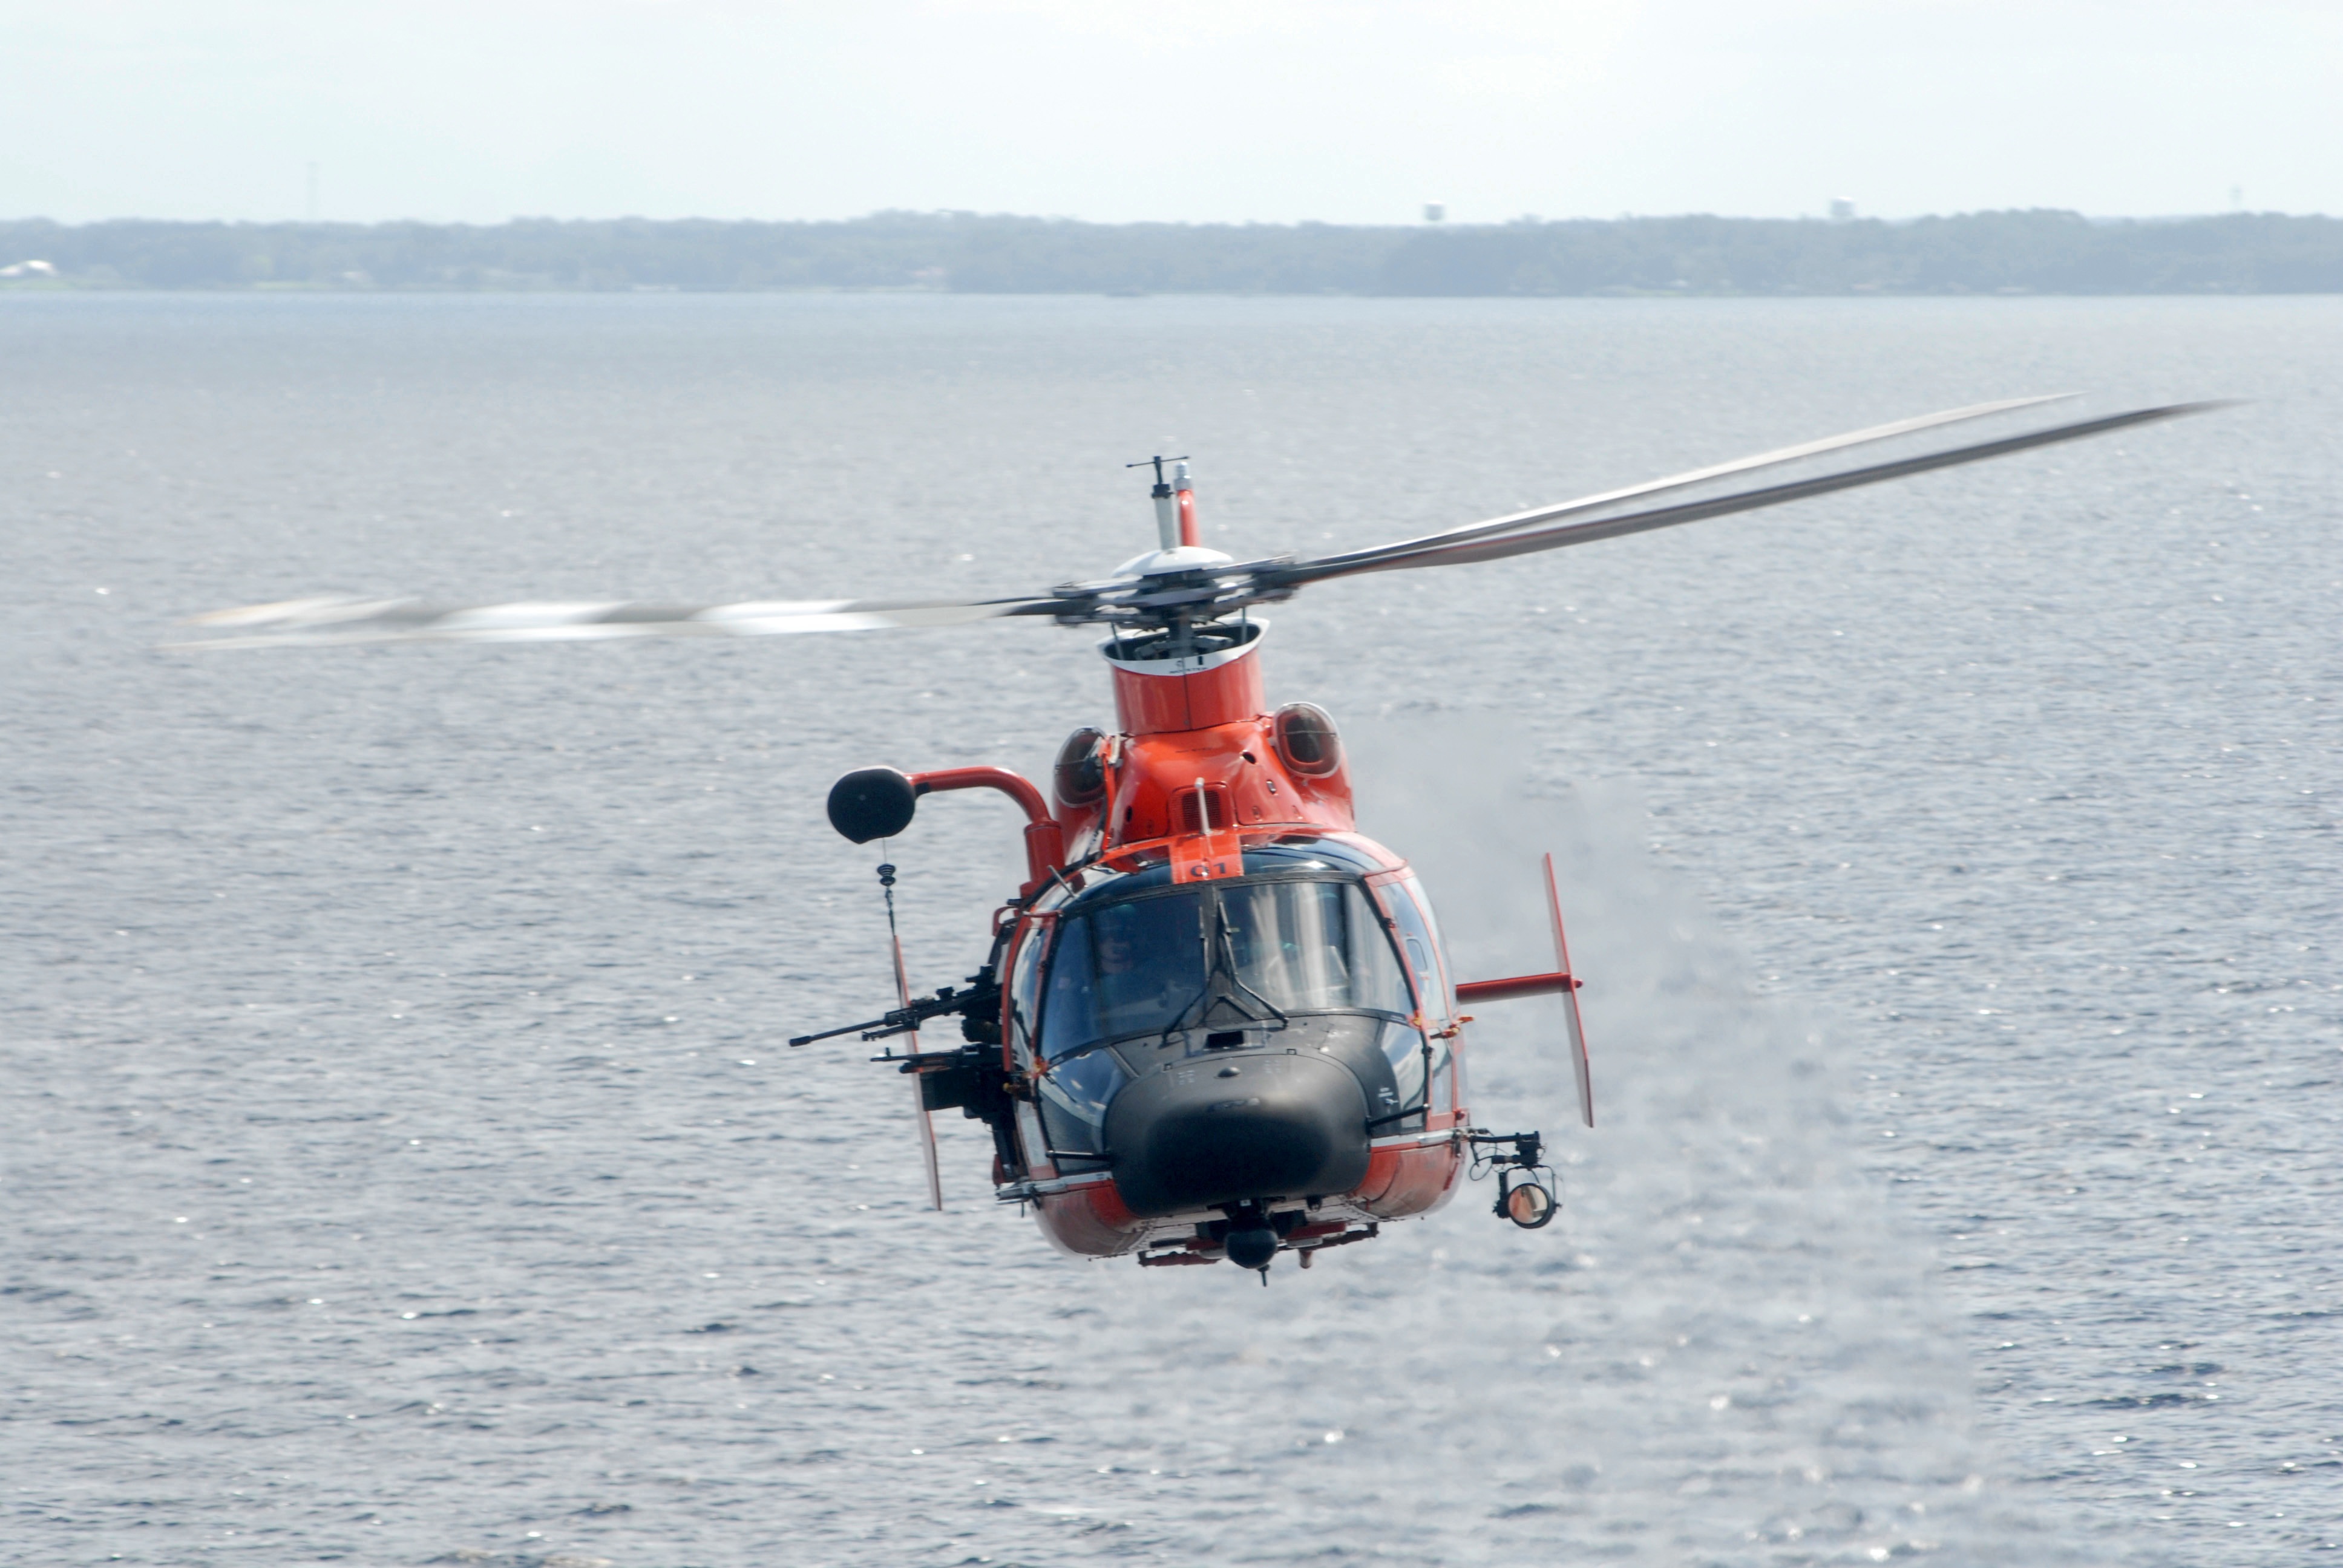 Helicopter over the River, Heli, Helicopter, Ocean, River, HQ Photo